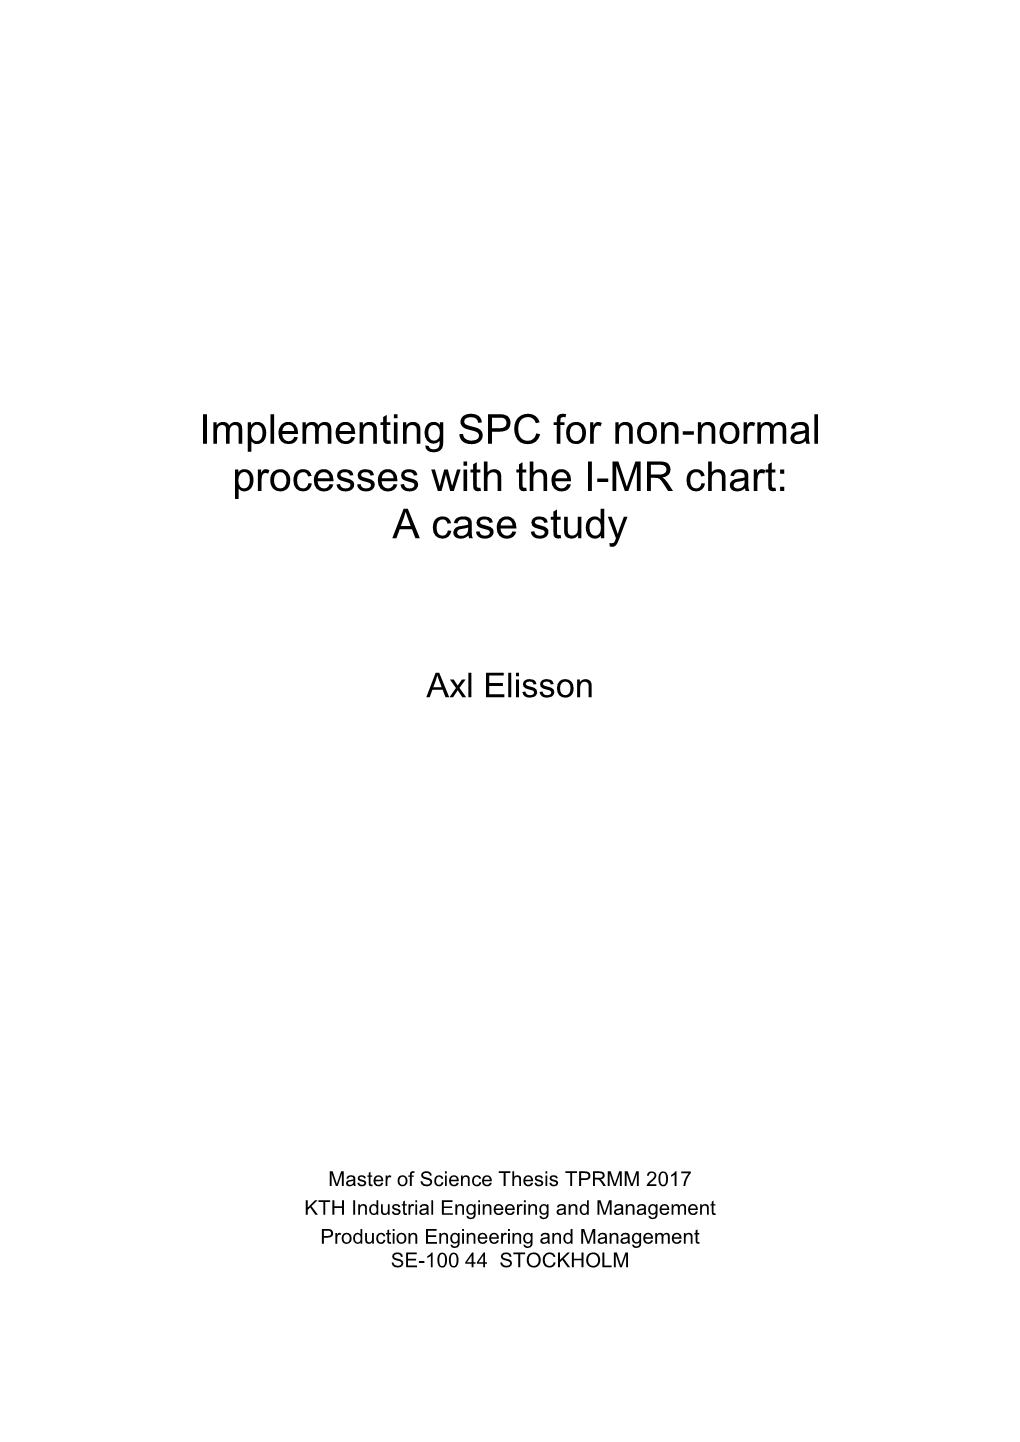 Implementing SPC for Non-Normal Processes with the I-MR Chart: a Case Study